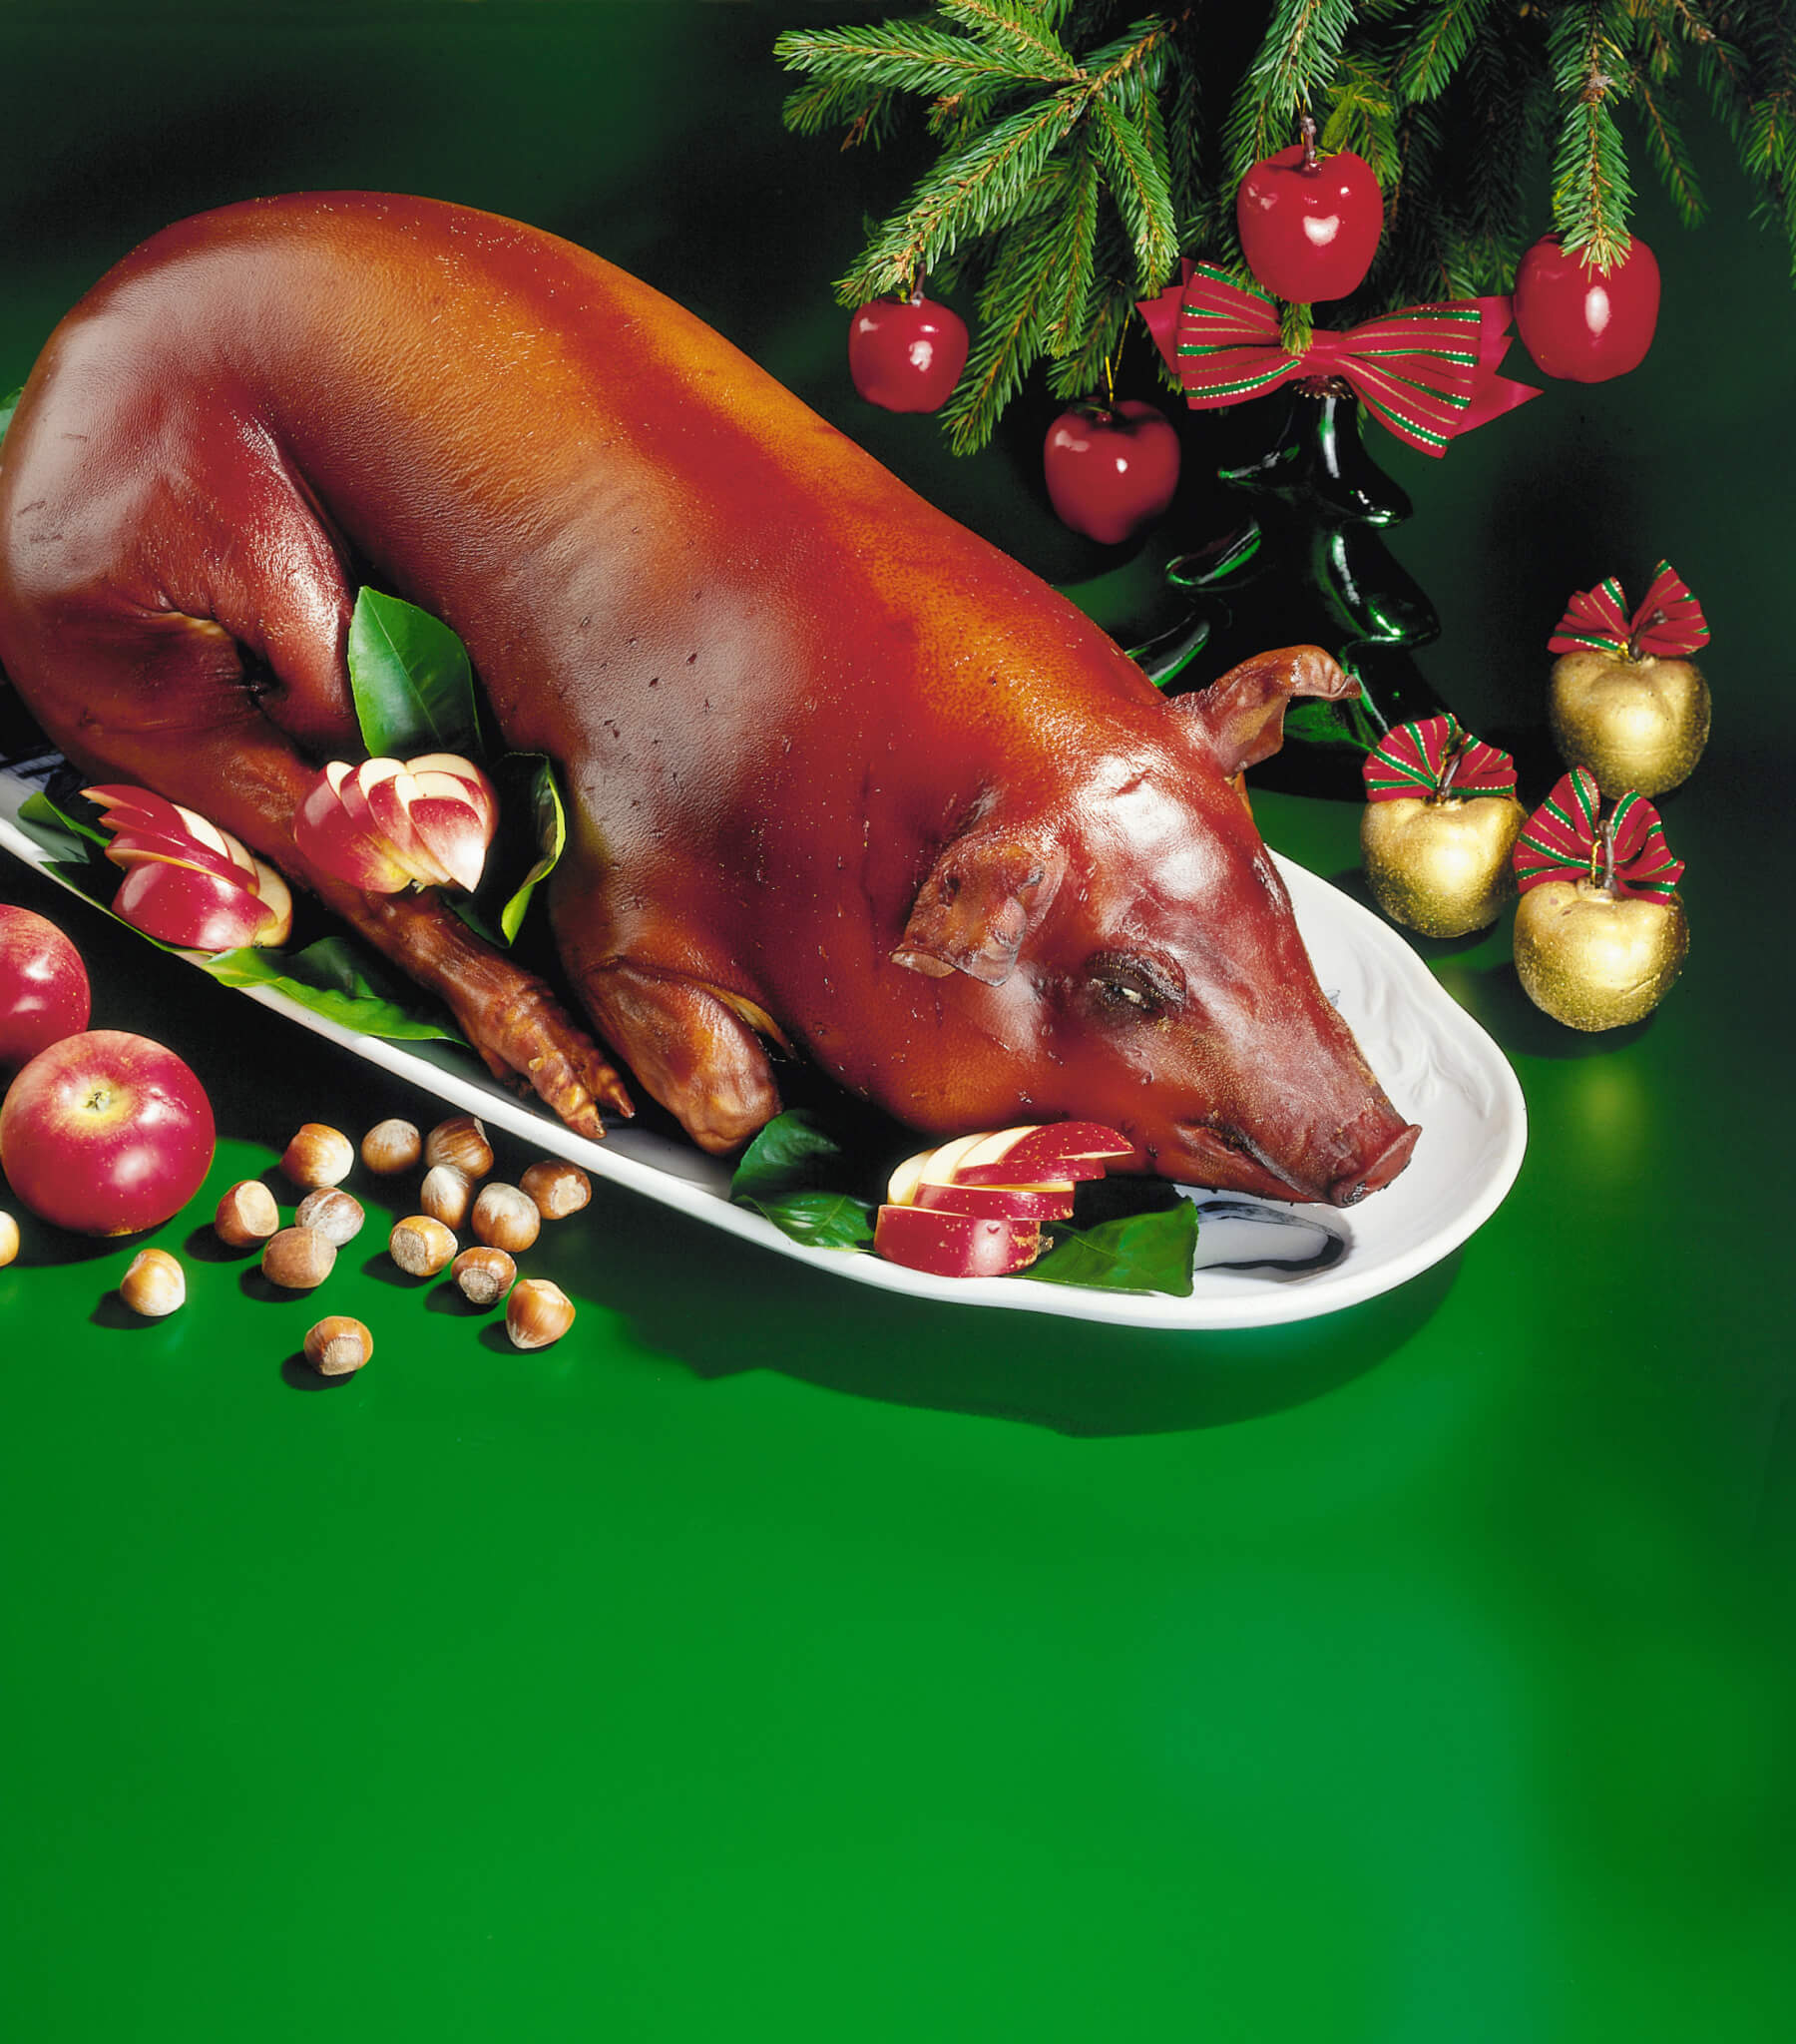 A pig who was killed and used as food for Nochebuena during Christmas time.